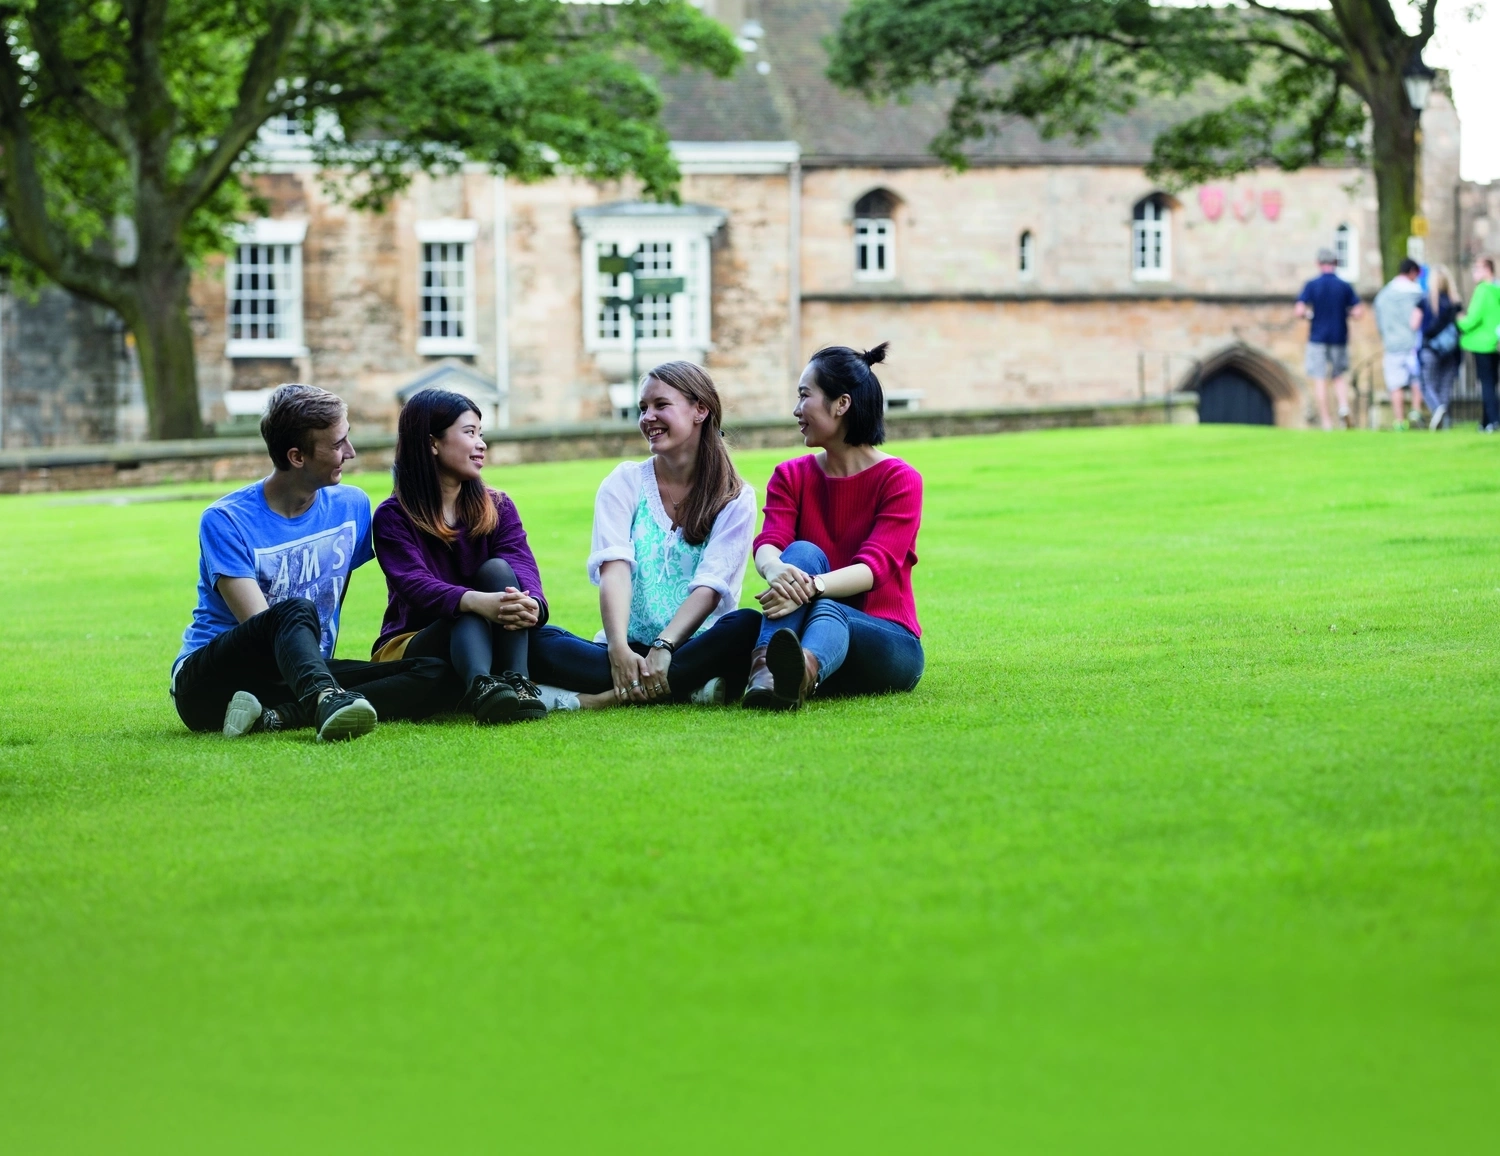 Group of 4 students sitting on grass.